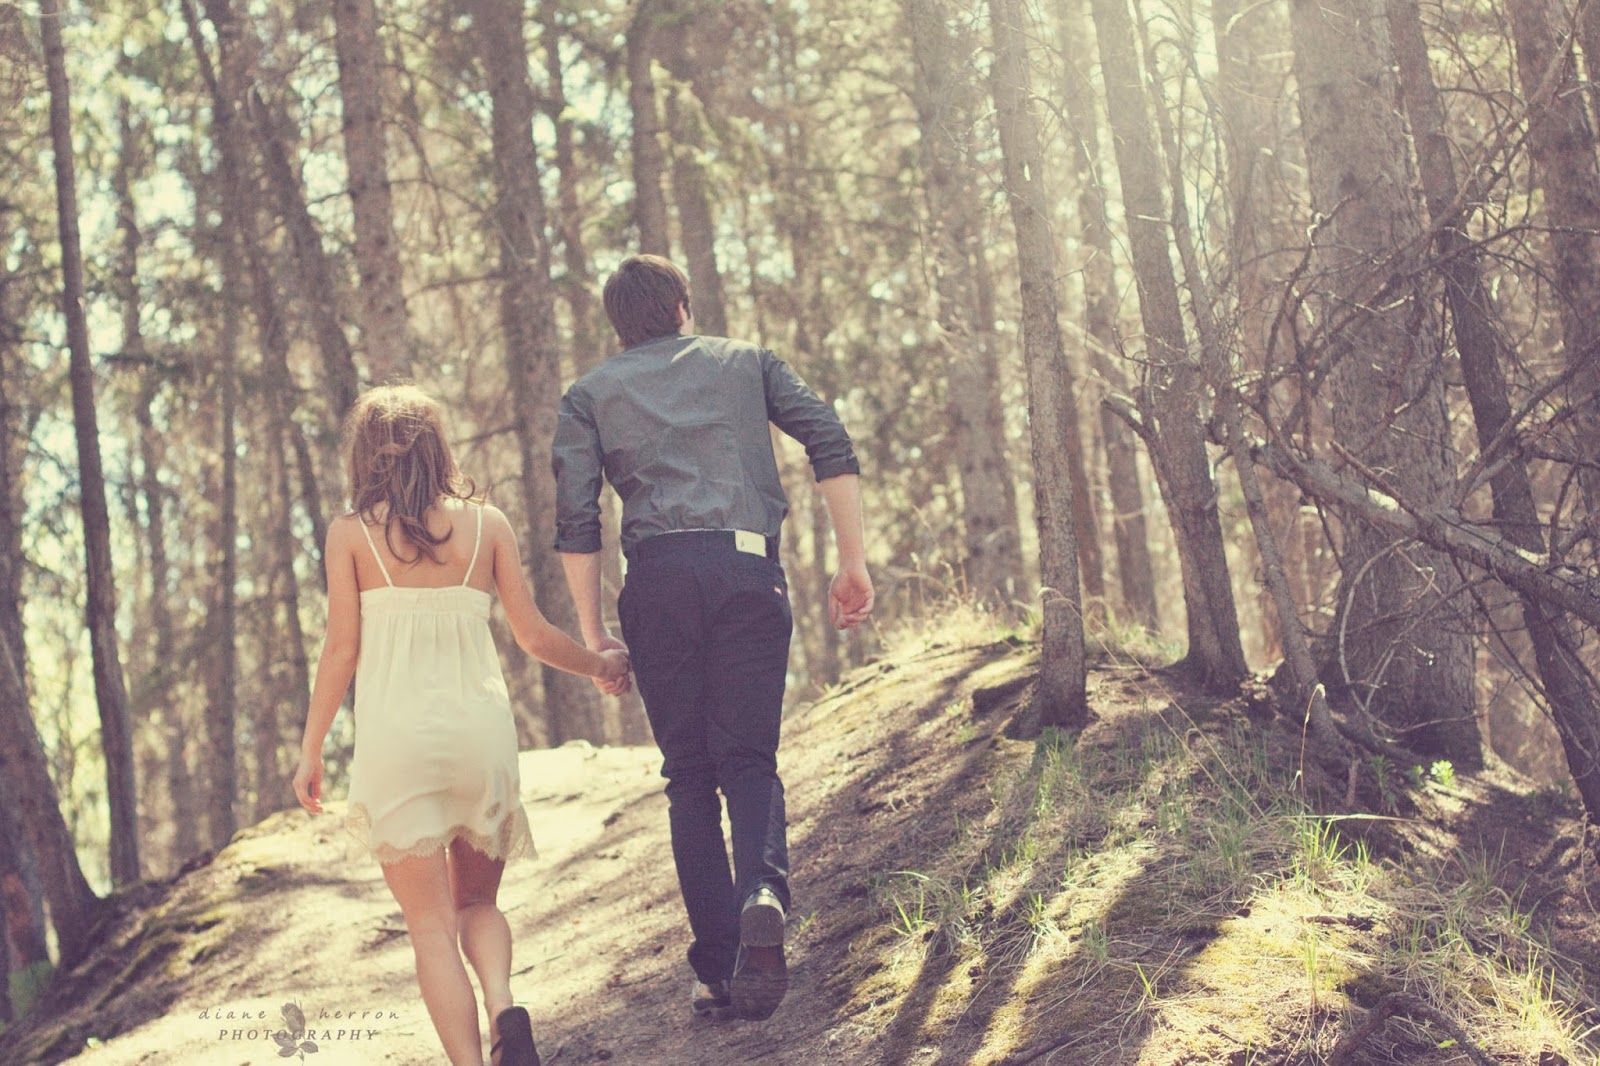 Photography Couples Wallpaper Best Couples HD Wallpaper. Vintage couple photography, Couple photography, Cute couple wallpaper